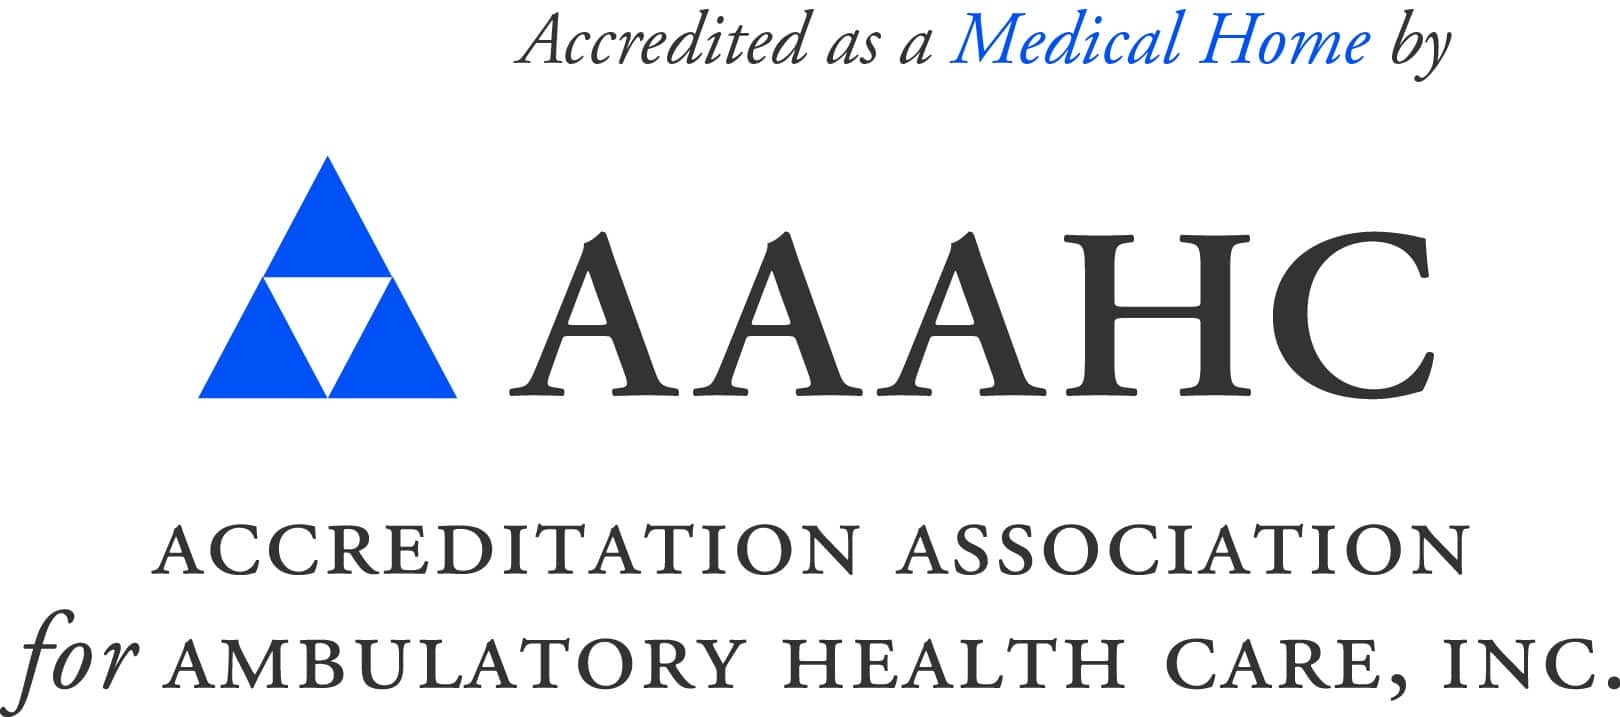 AAAHC Medical Home Logo - official